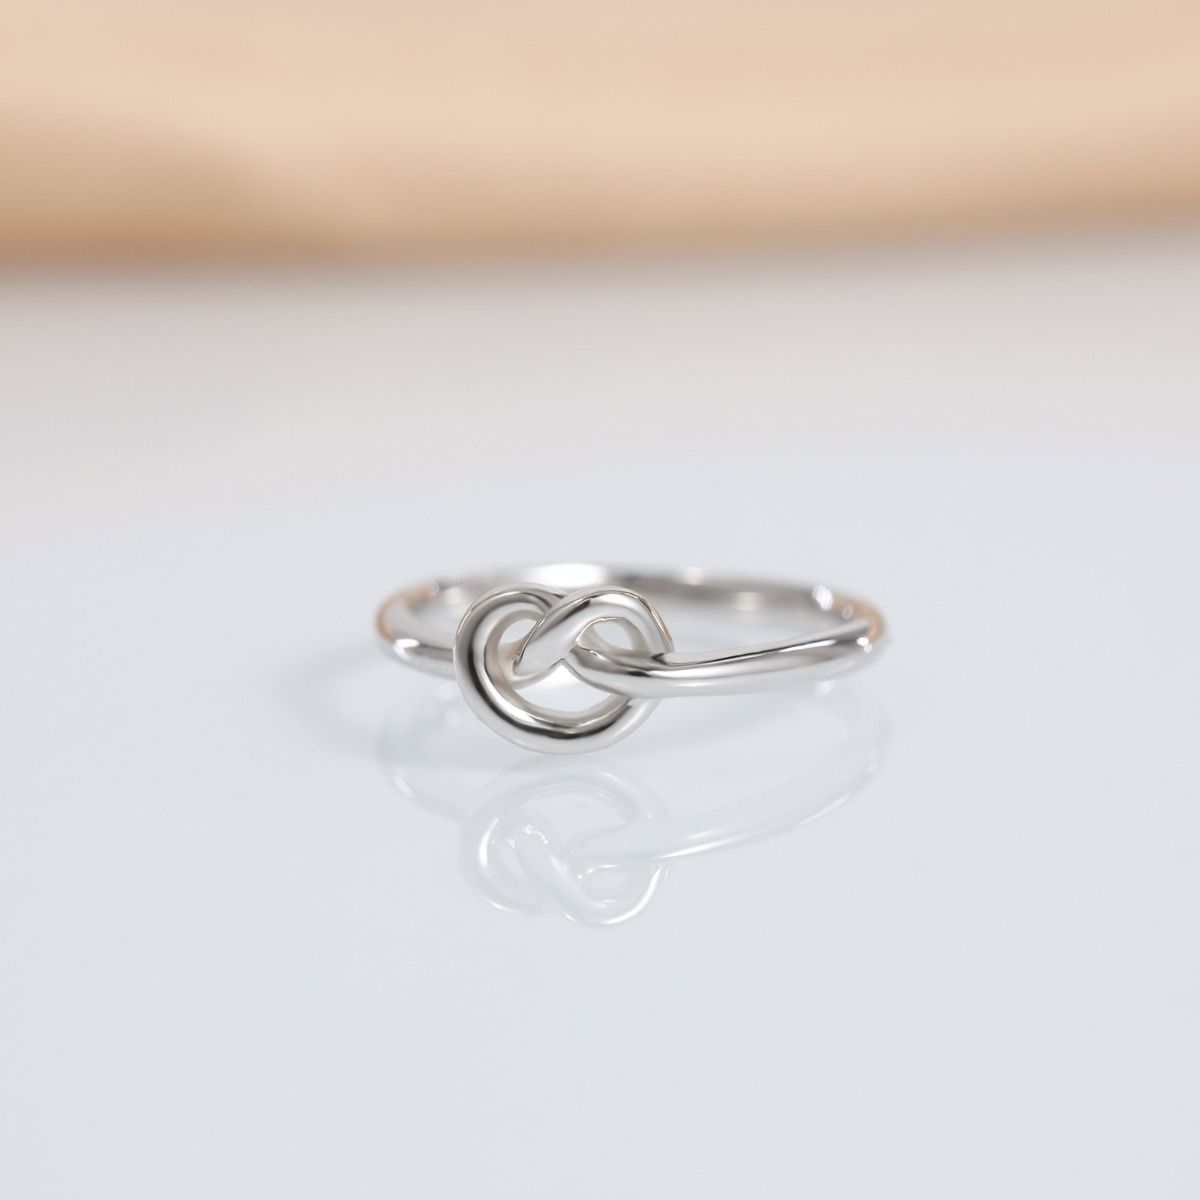 925 Sterling Silver Heart Knot Ring